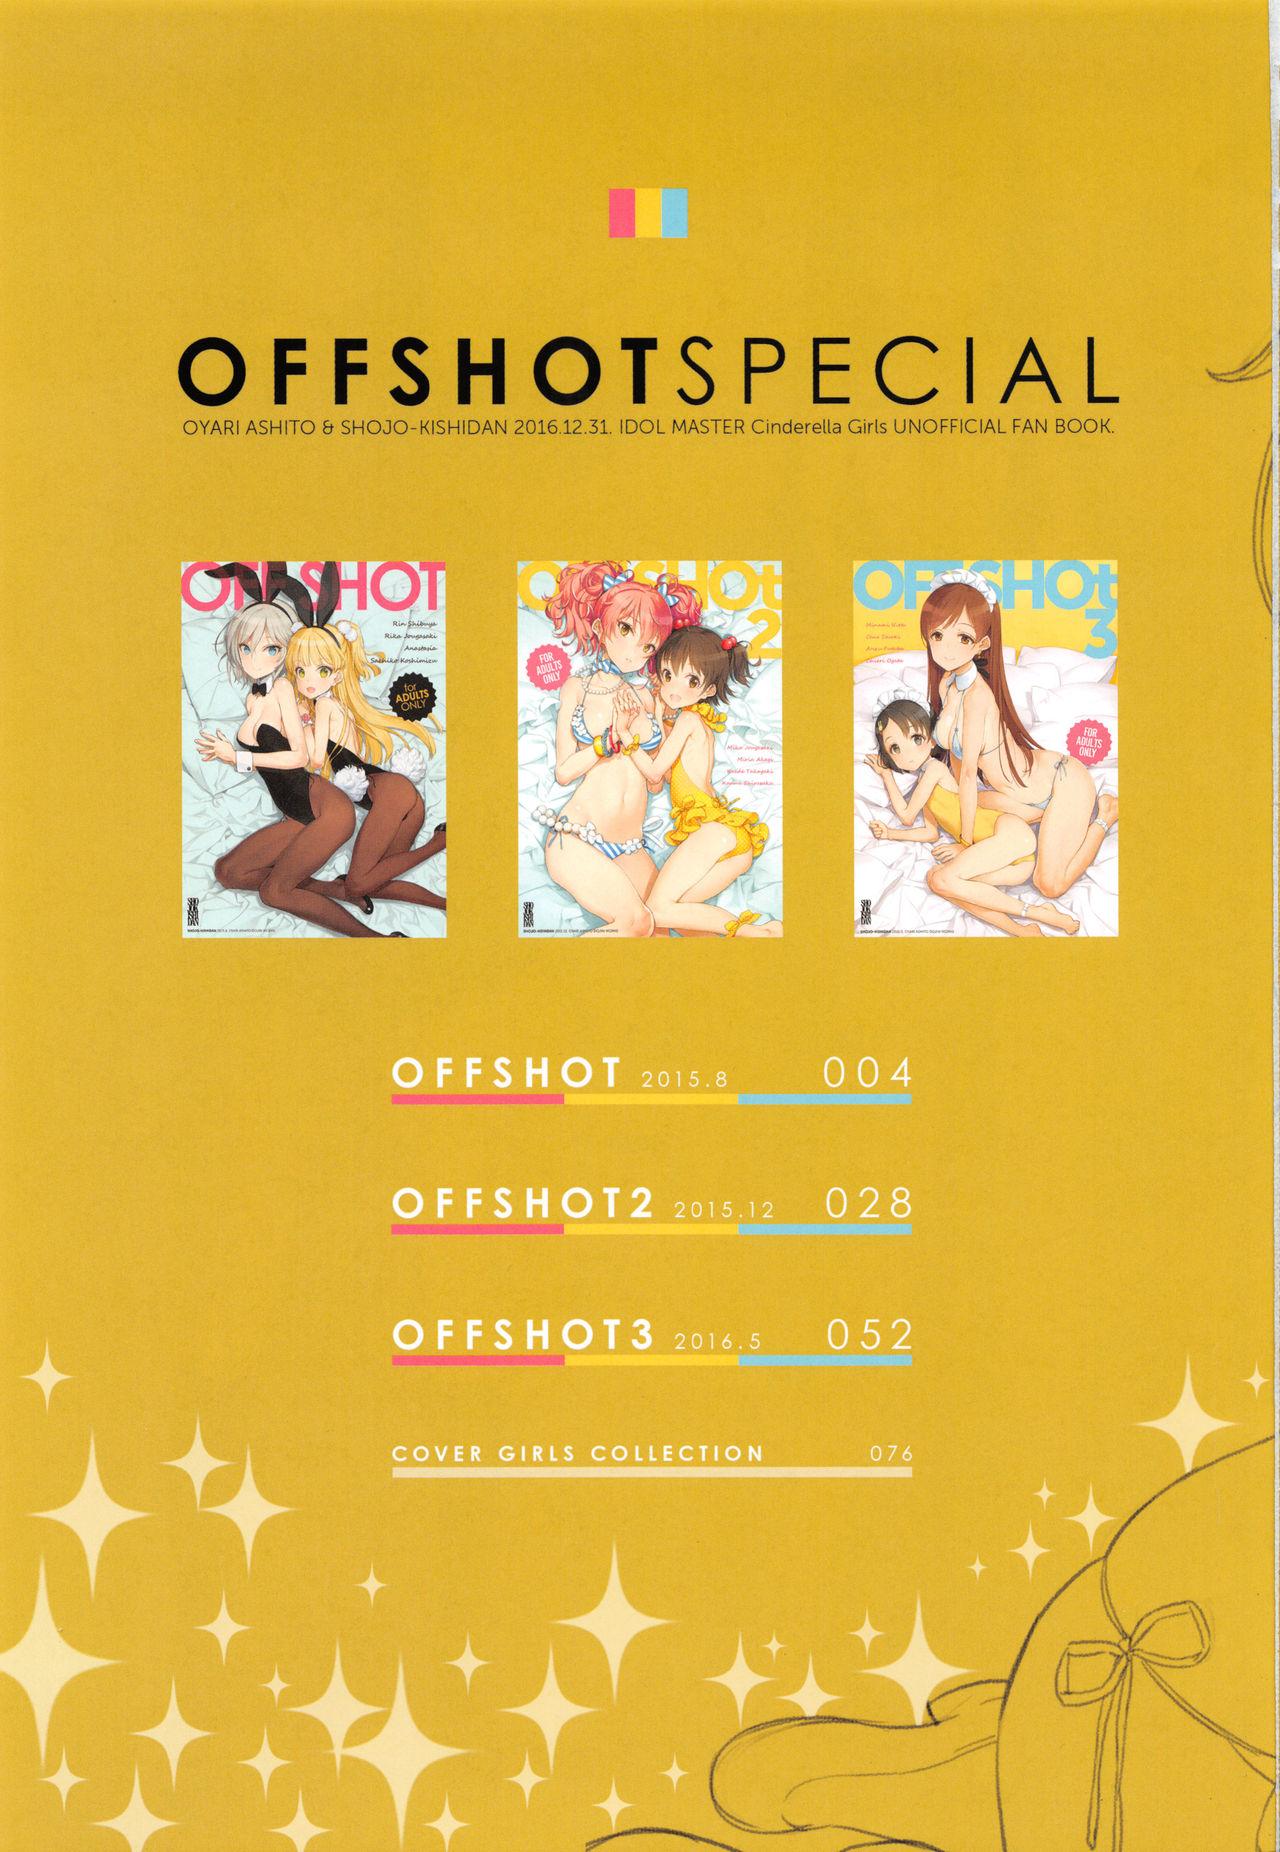 Closeups OFF SHOT SPECIAL - The idolmaster Puto - Page 3